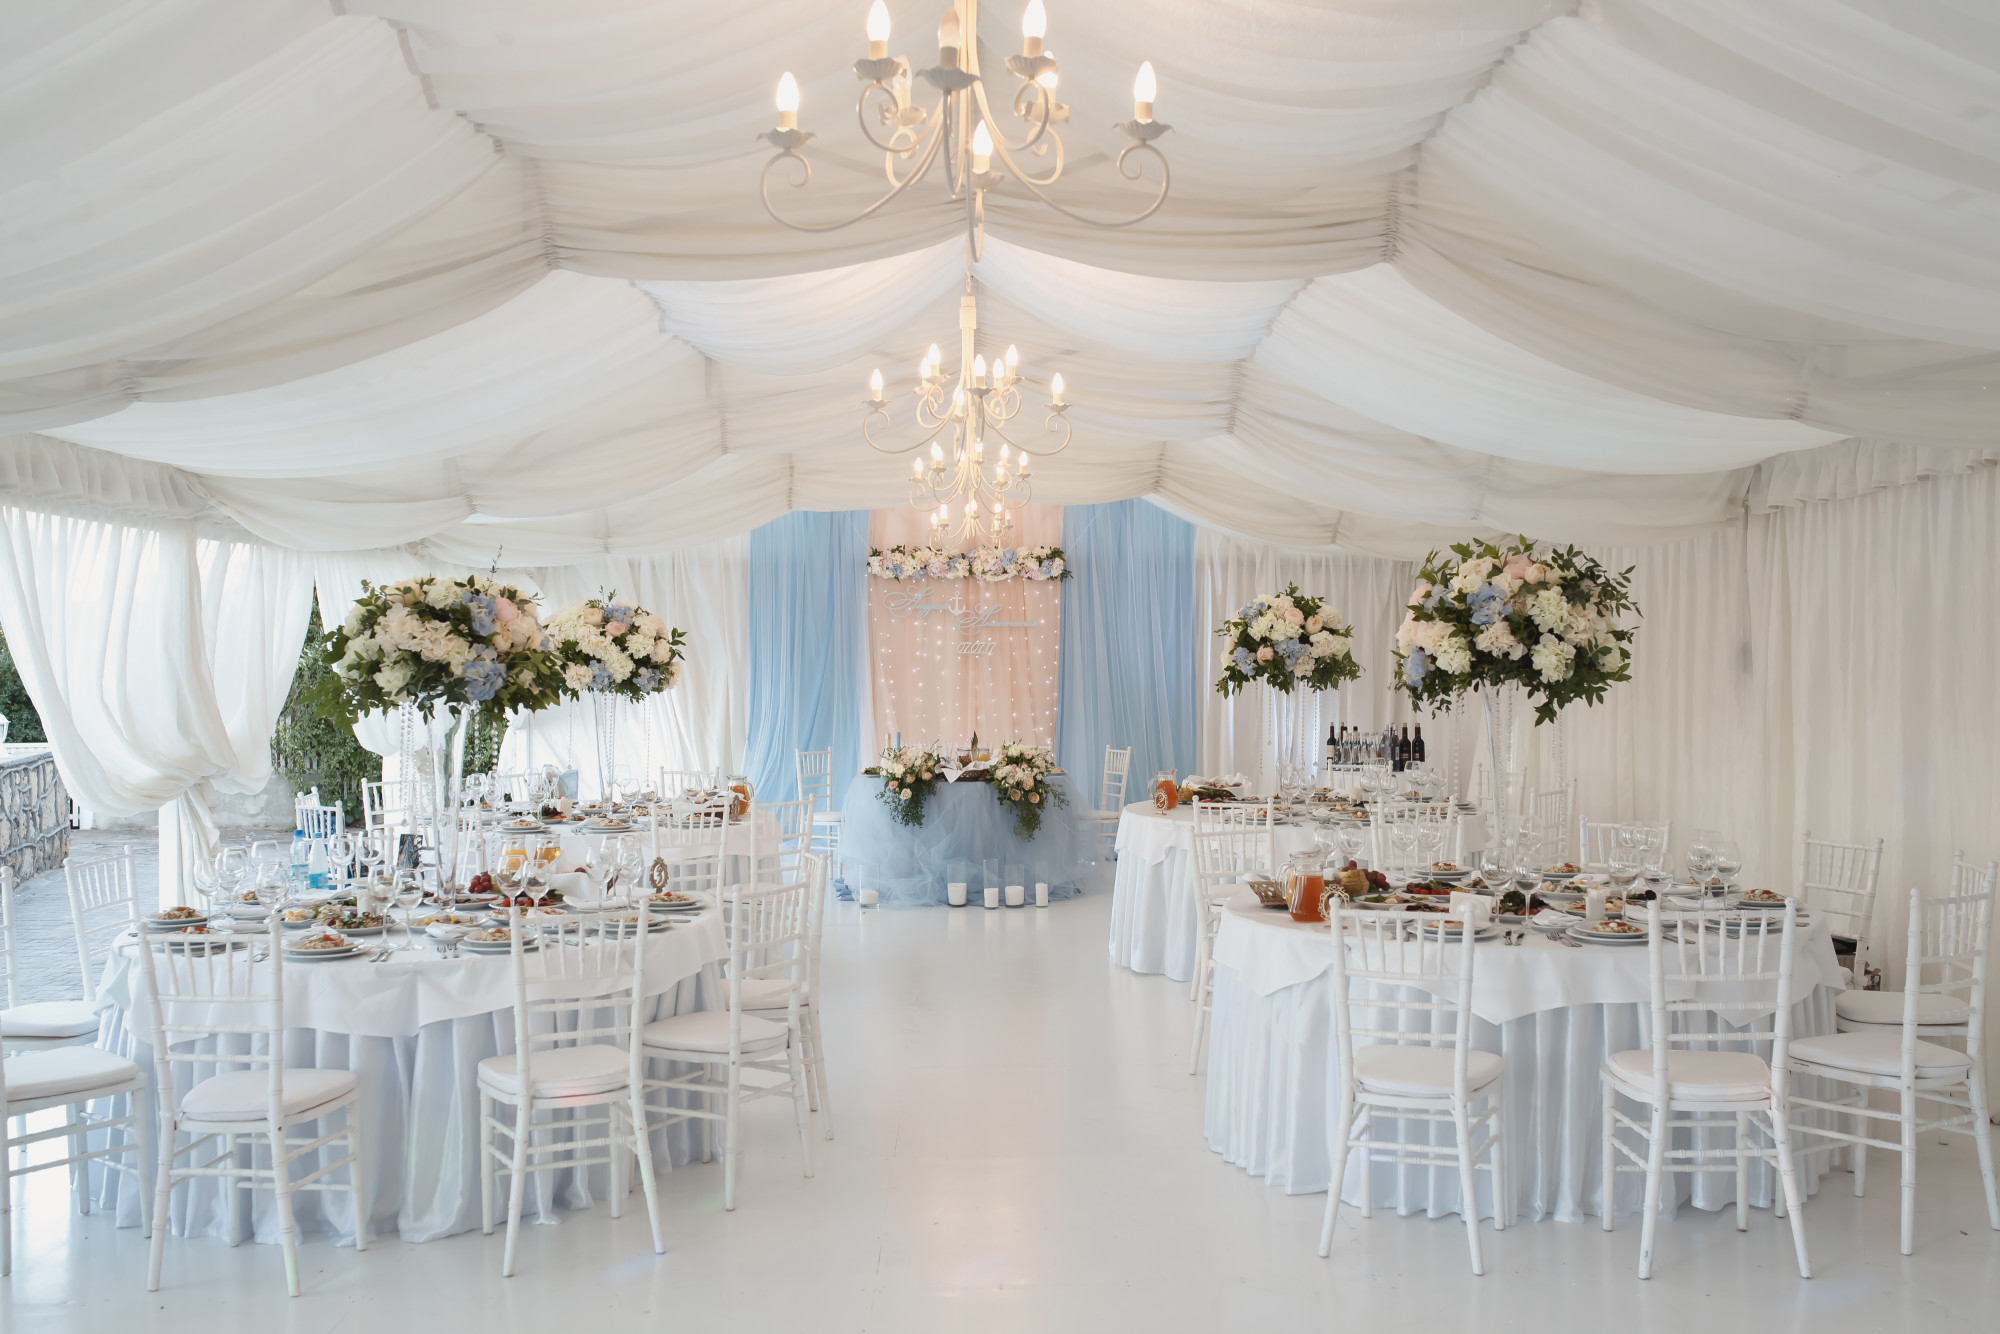 How to Find a Wedding Venue That's as Beautiful as Your Vows